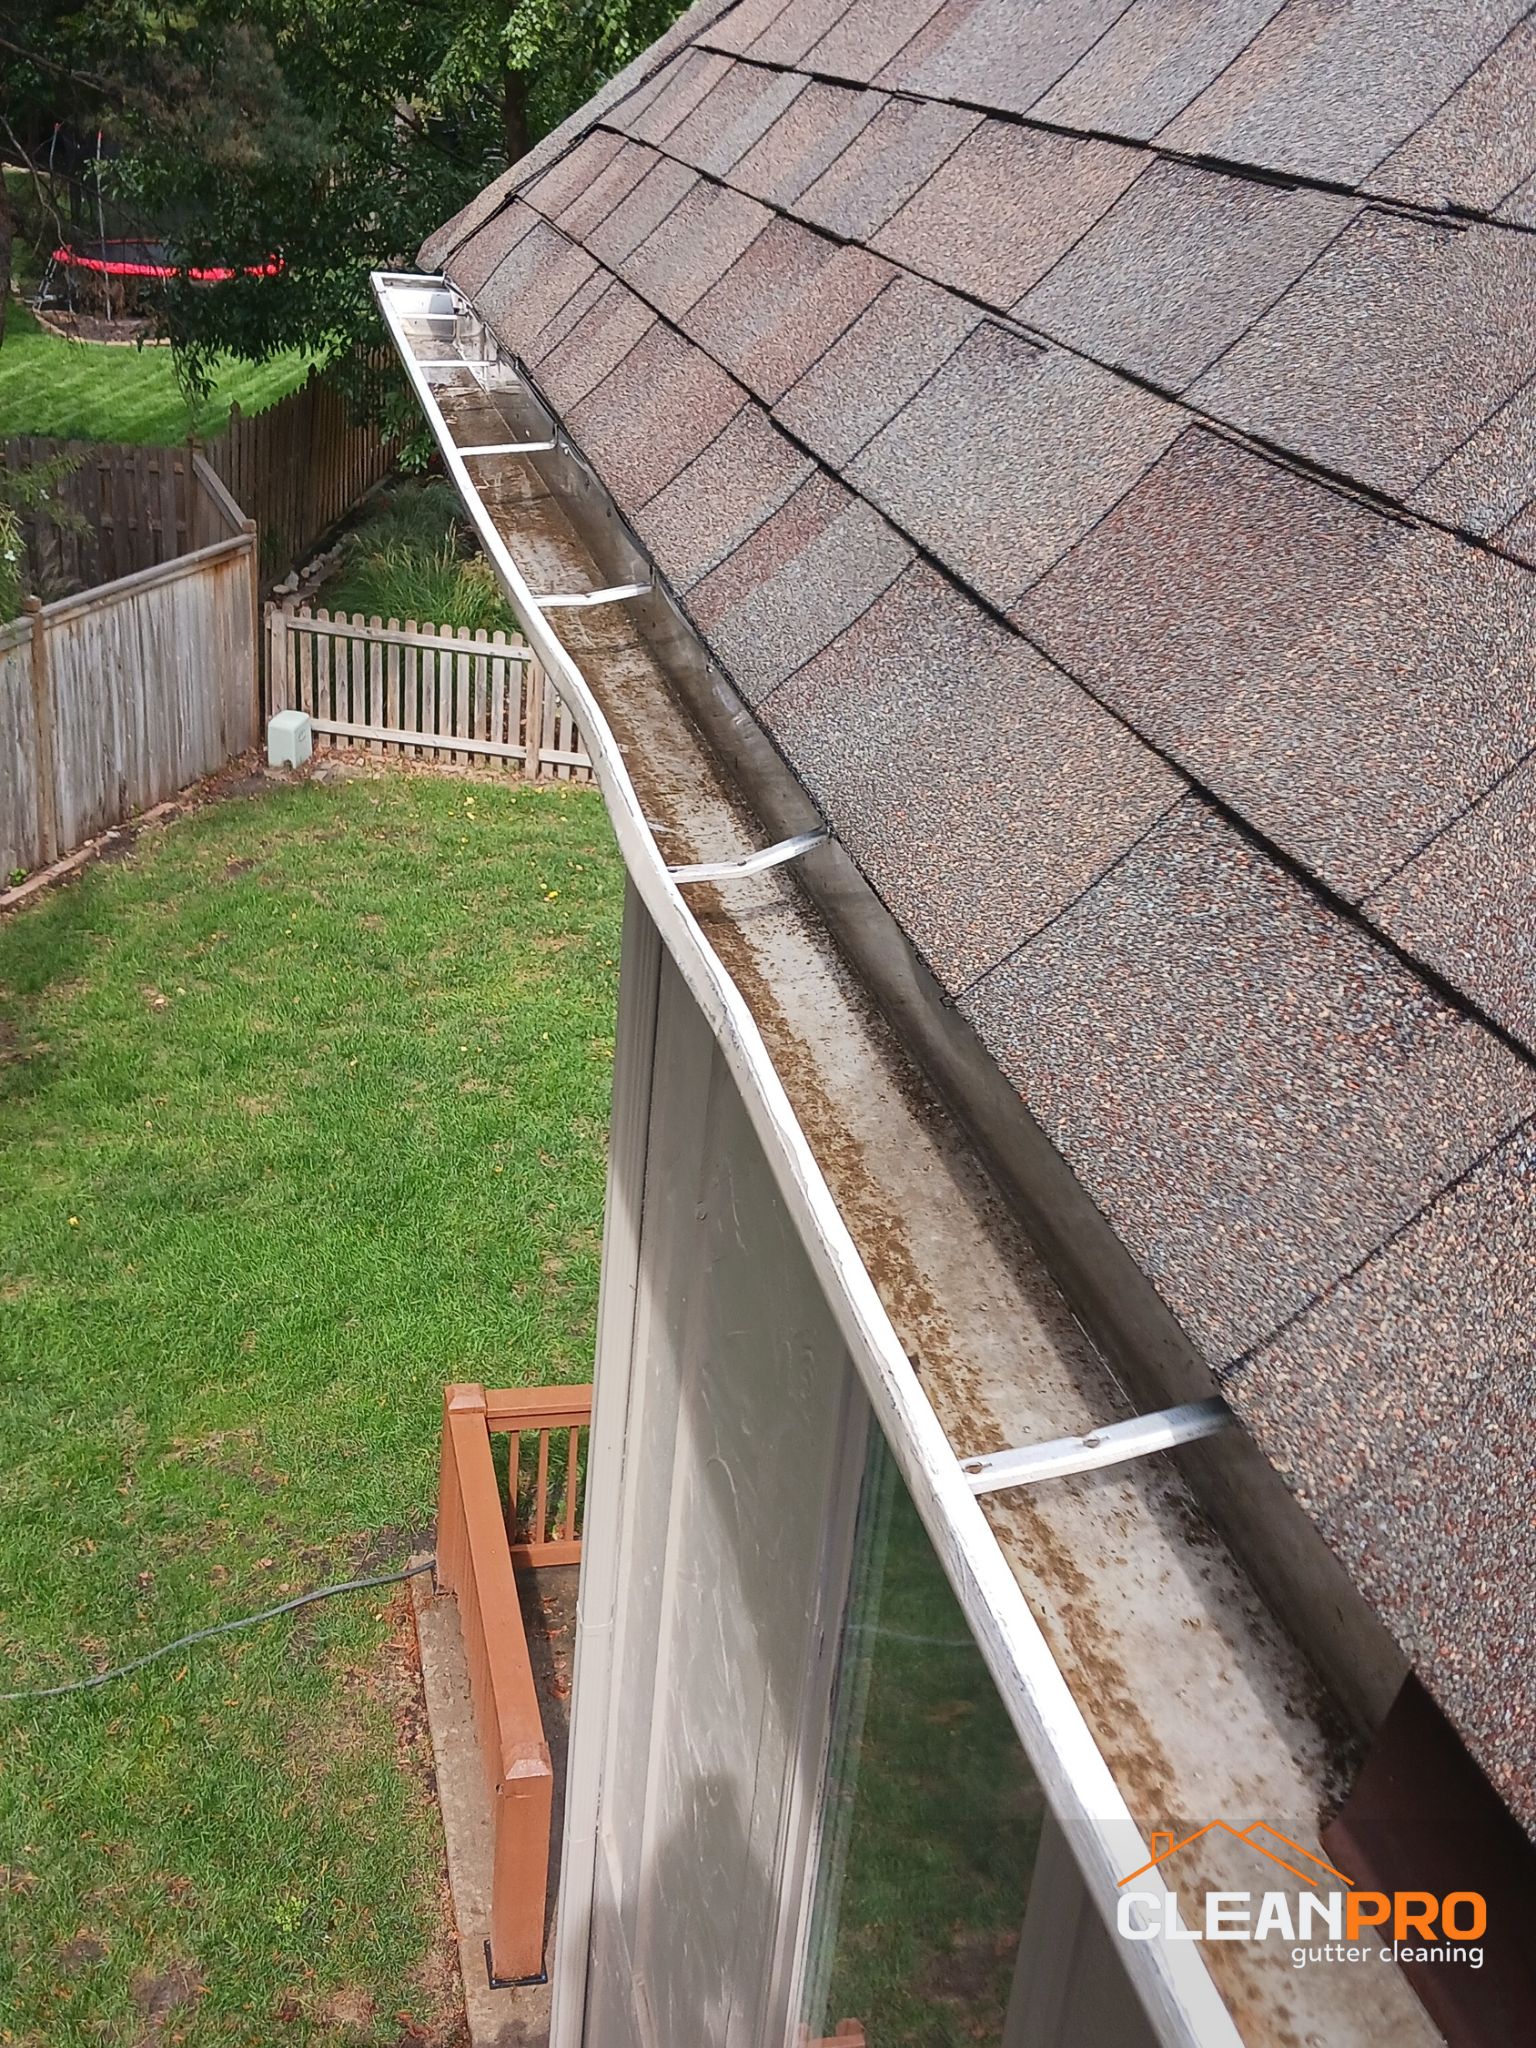 Best Gutter Cleaning Service in Sarasota